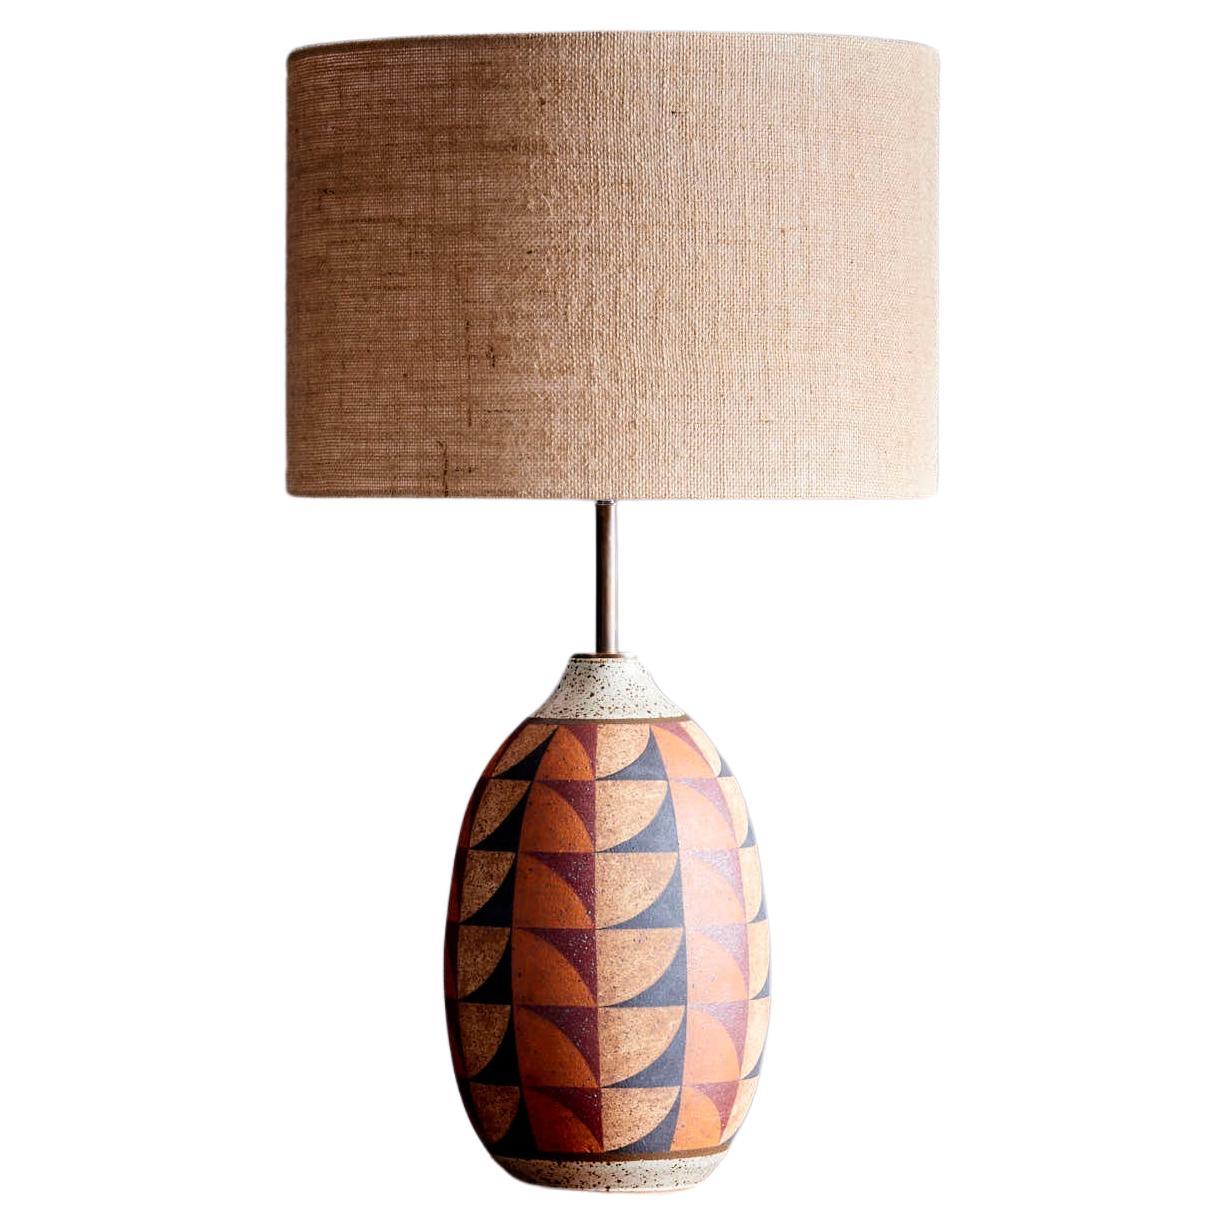 Kat & Roger Table Lamp with hand-crafted and hand-painted ceramic base, USA